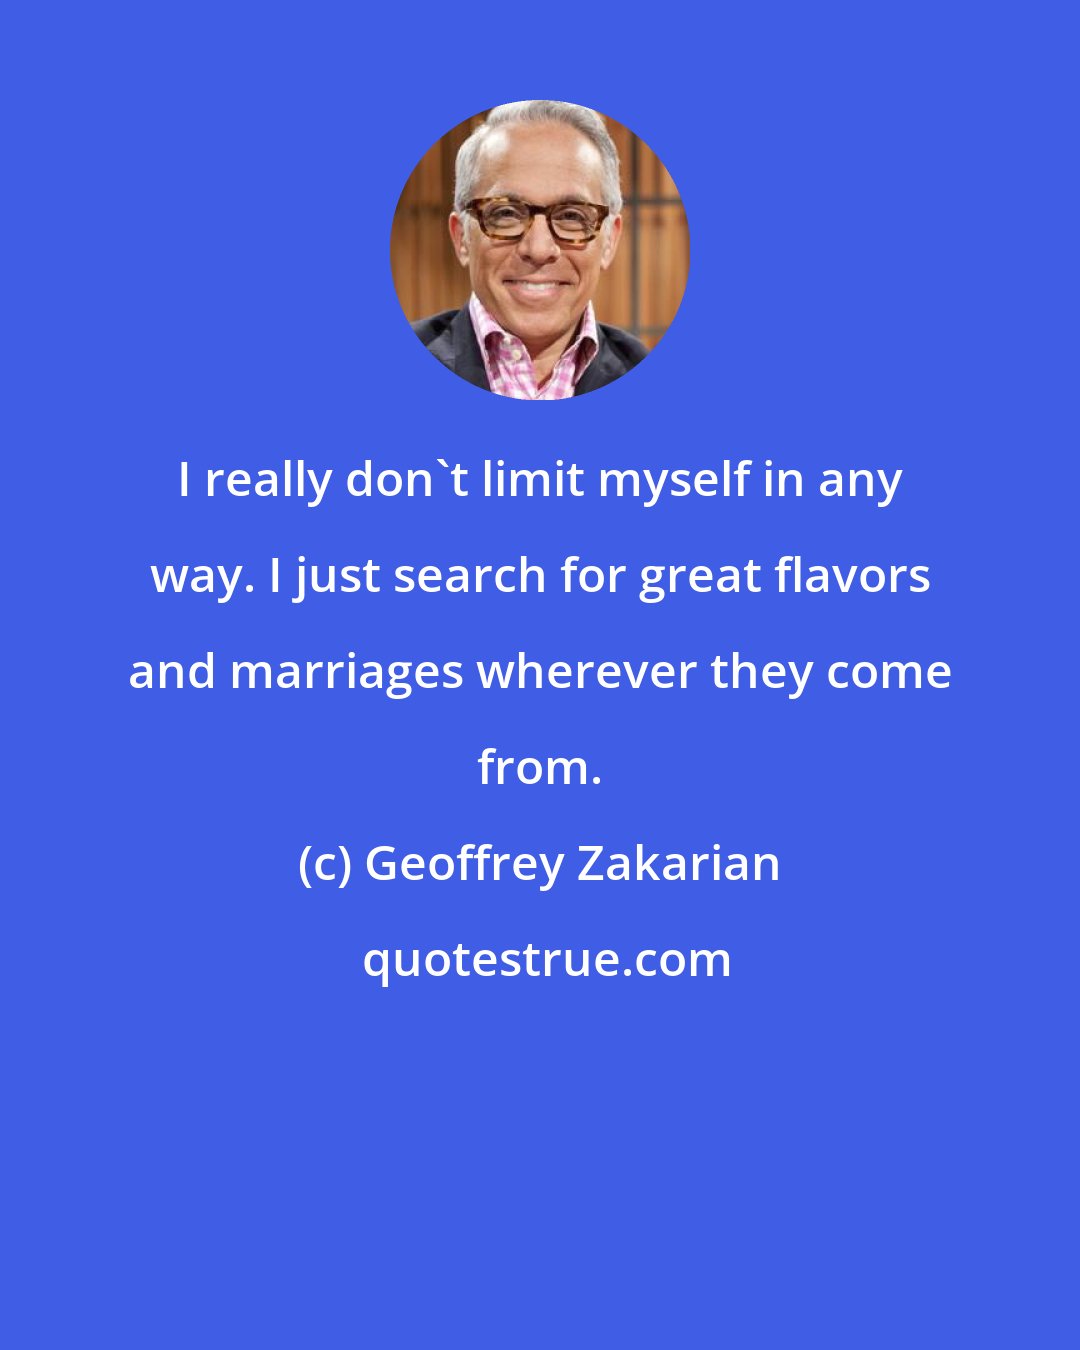 Geoffrey Zakarian: I really don't limit myself in any way. I just search for great flavors and marriages wherever they come from.